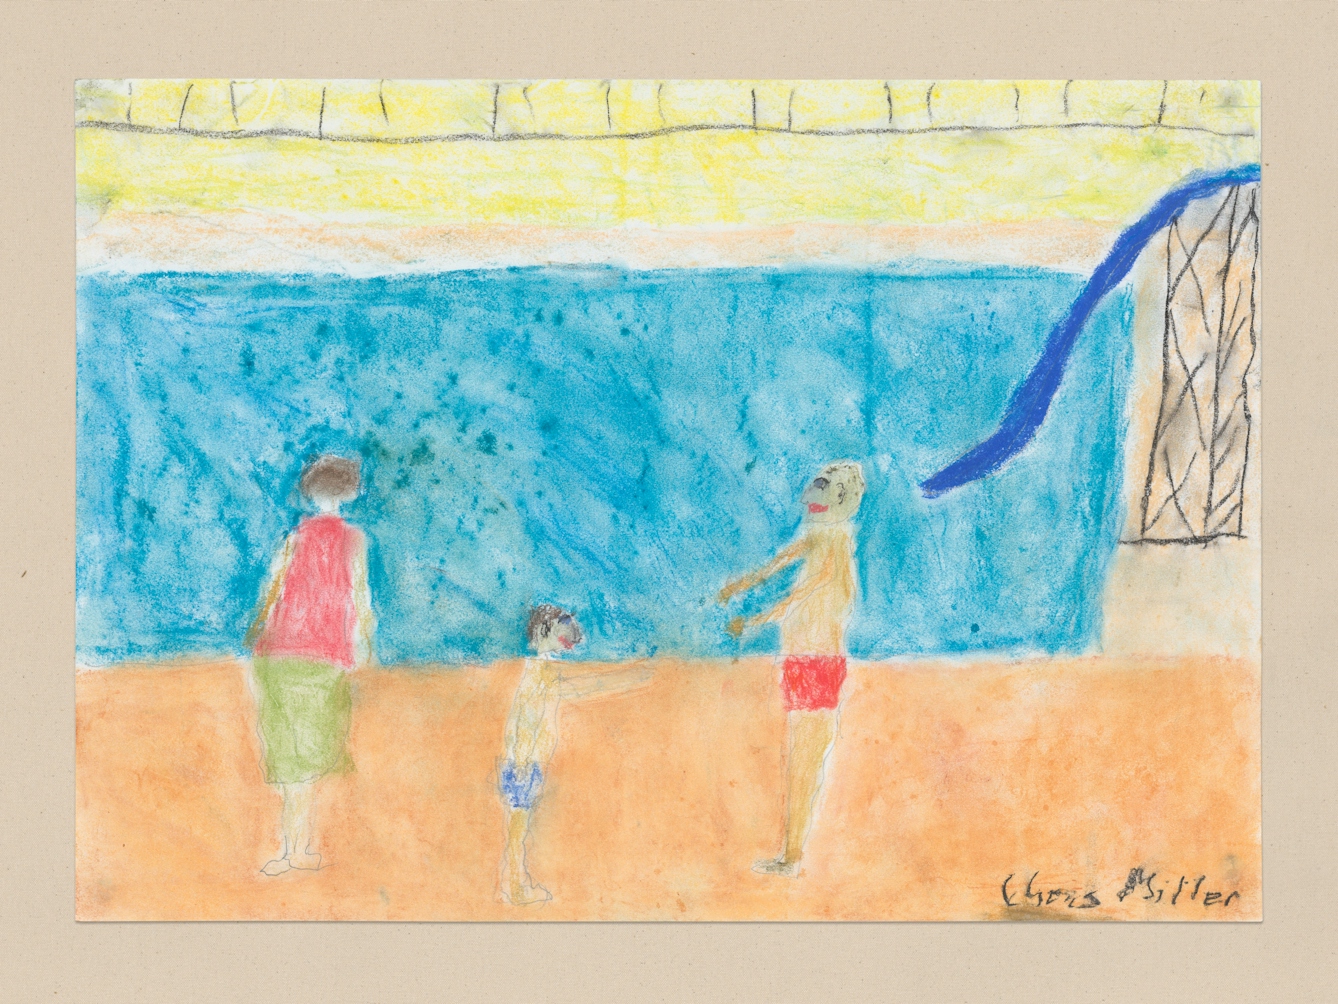 Pencil and crayon on paper artwork by Chris Miller titled ‘What do you think of the slide’. In the artwork is a swimming pool scene with a large blue slide.  Three figures are present in the foreground set against an orange floor. The figures appear to be a woman with her back to the viewer, a small child in swimming trunks facing right, towards a man in red swimming trunks who is facing left.